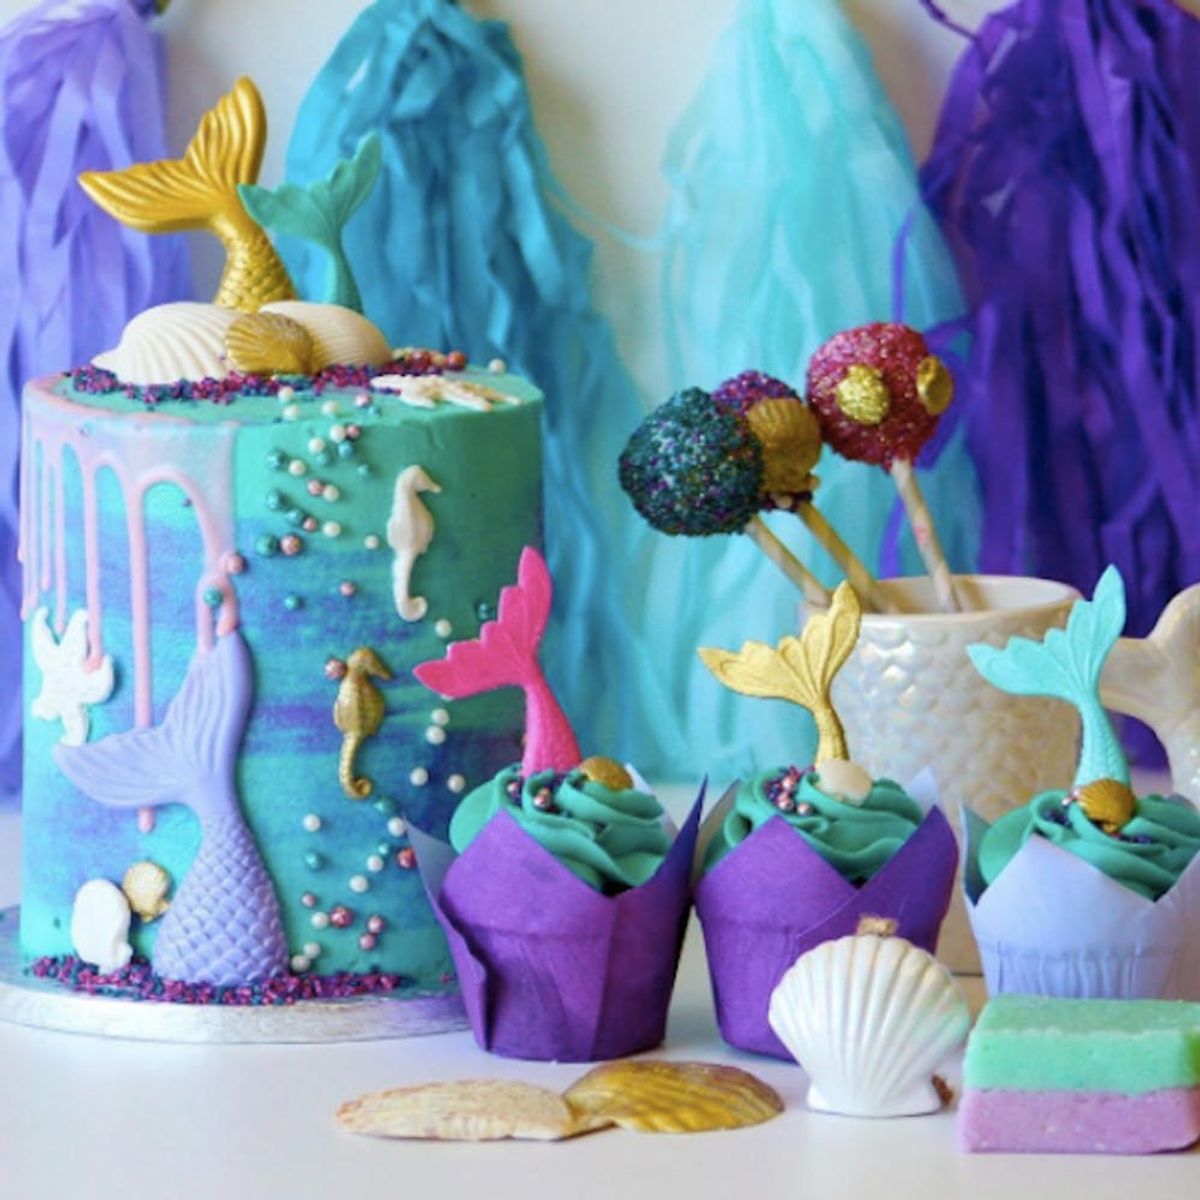 Live Out Your Dreams With These 11 *Gorgeous* Mermaid Cakes